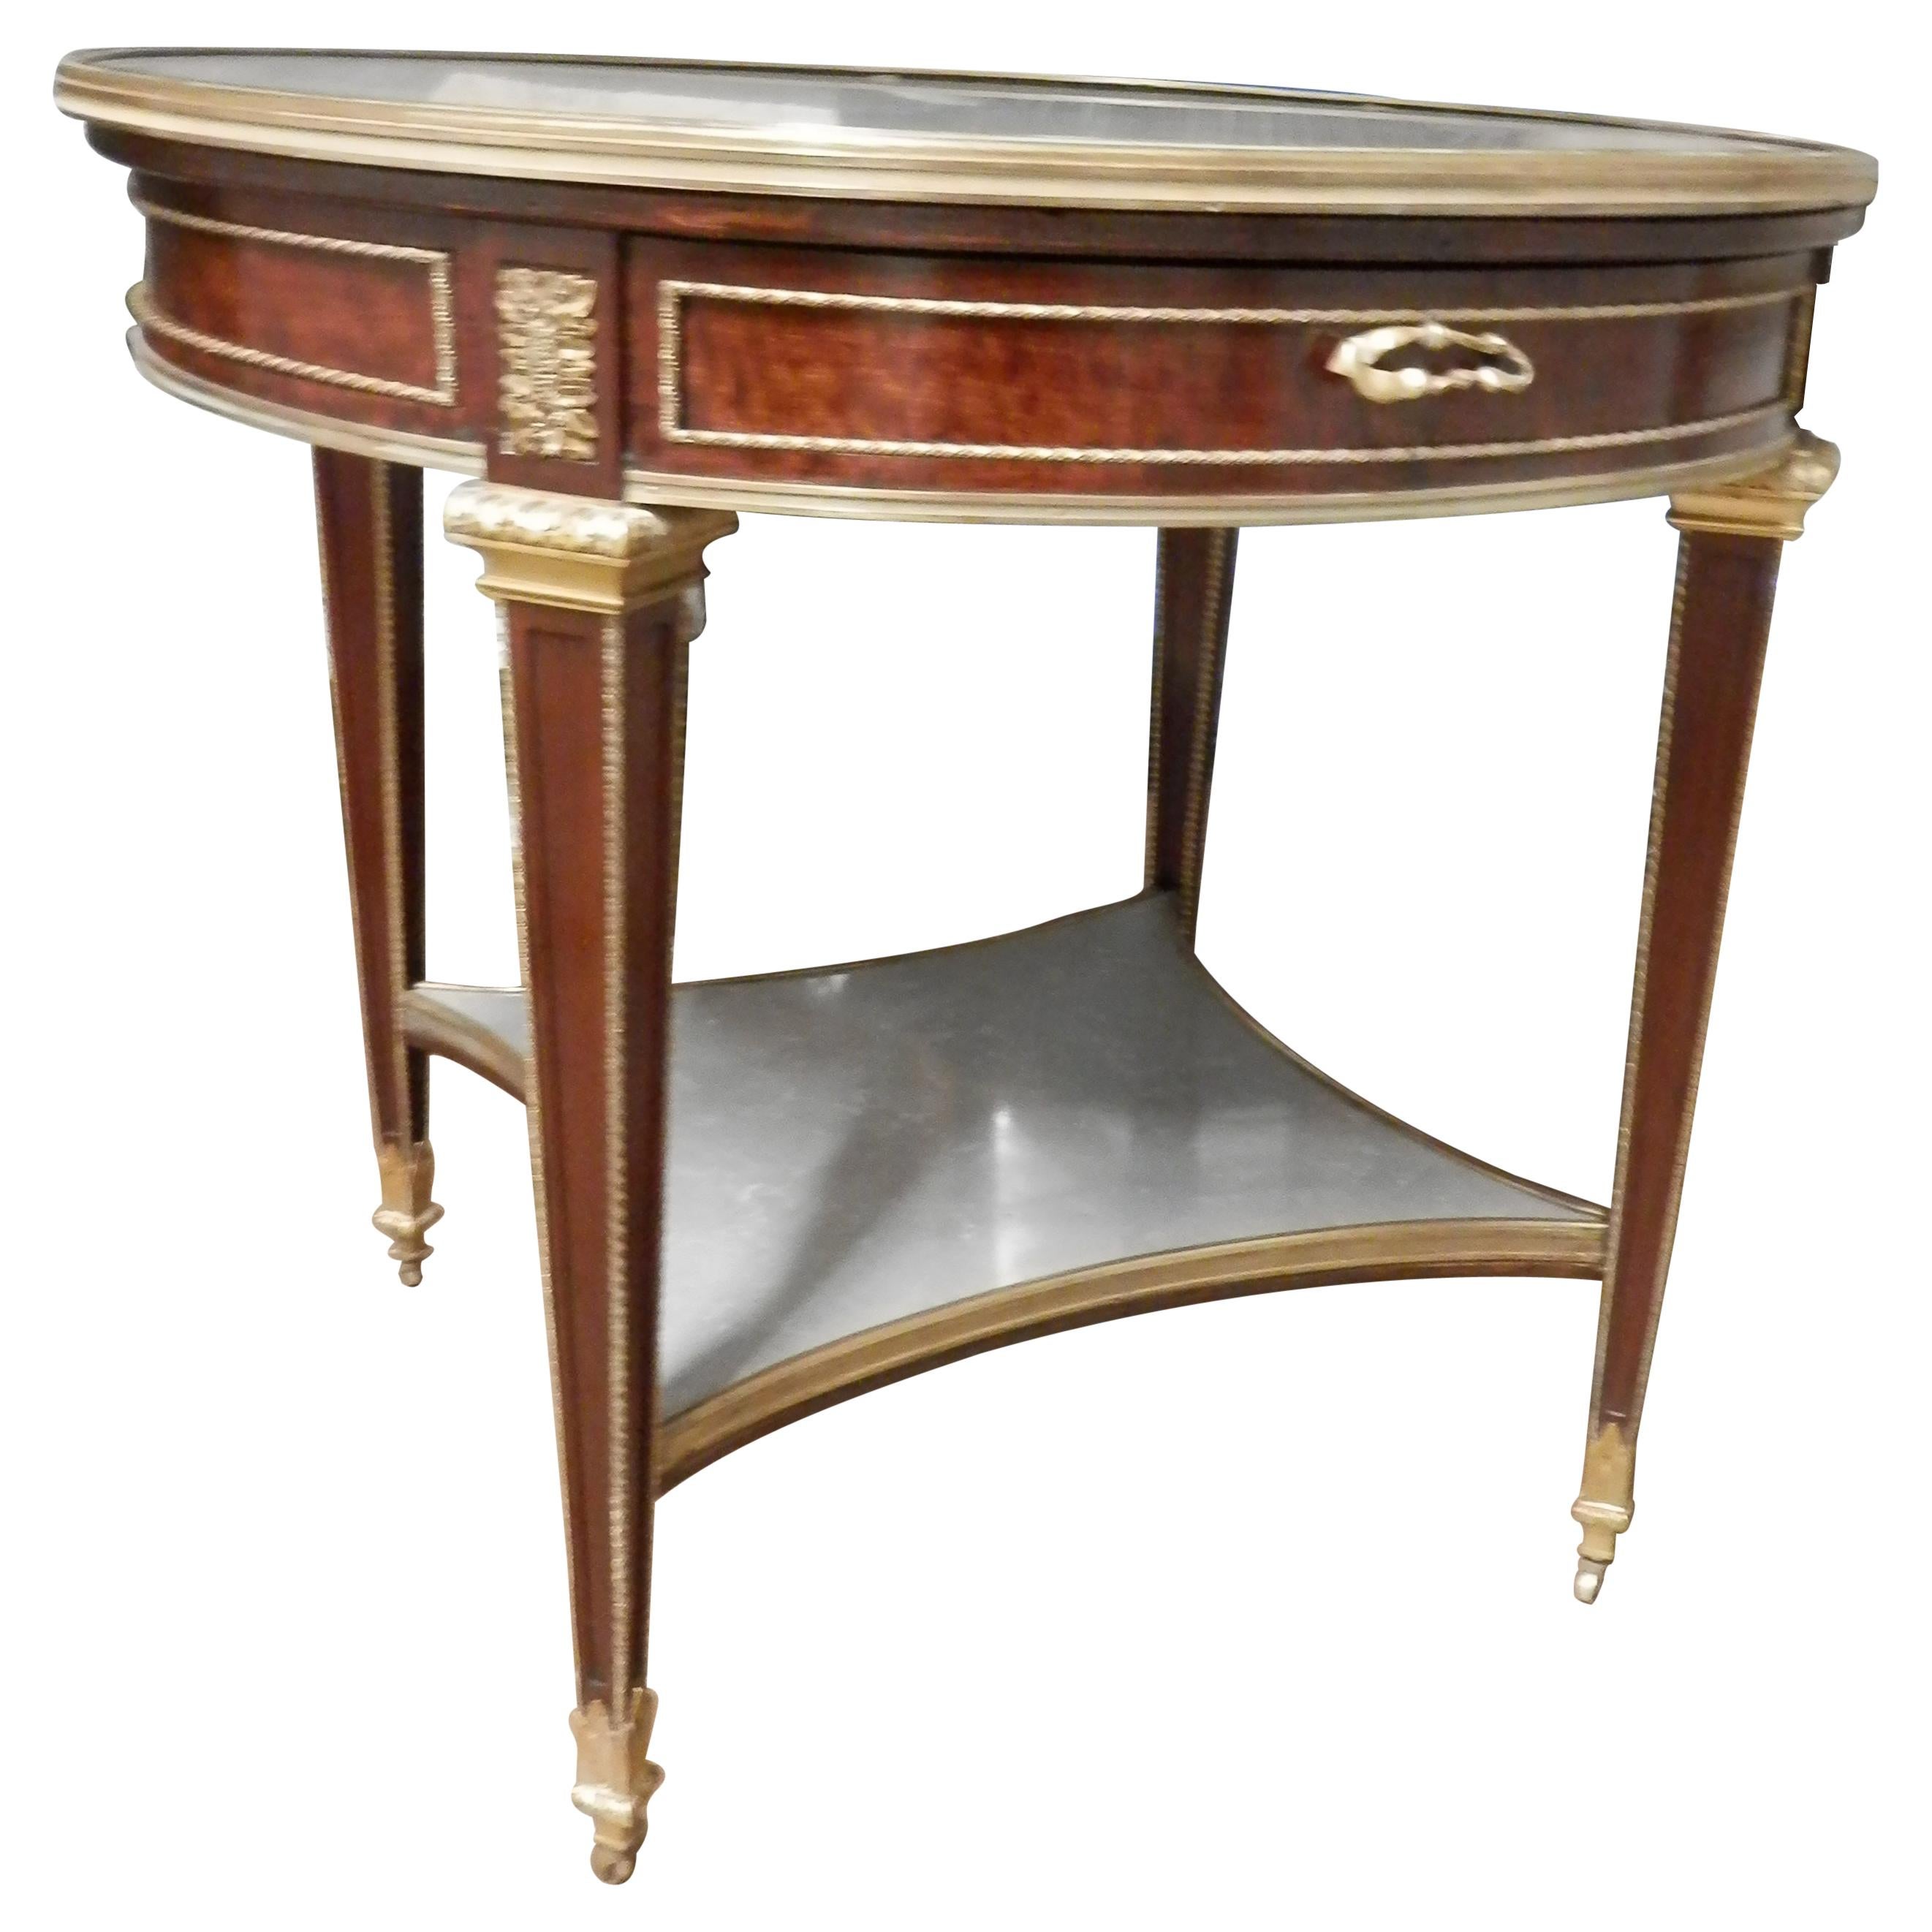 Very Fine and Rare 19th C French Louis XVI Center Table Attributed to Durand For Sale